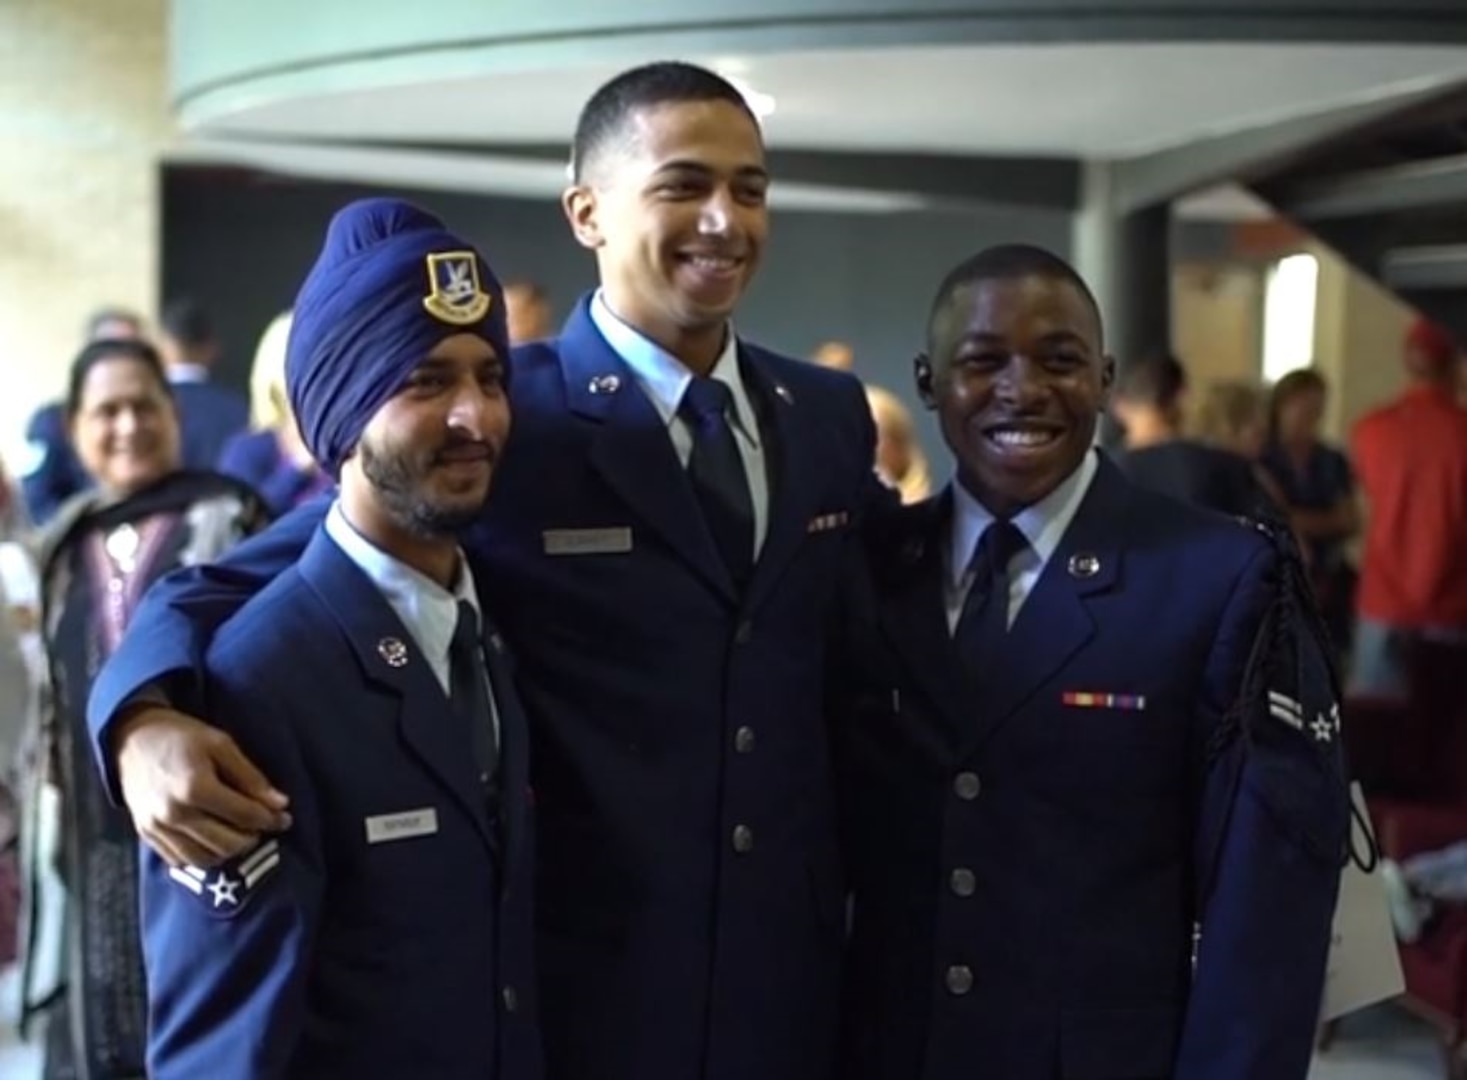 Airman 1st Class Sunjit Rathour earns his Security Forces beret as the first Sikh Airman to secure full religious accommodation, starting at Basic Military Training through Security Forces Apprentice Course, to wear a turban and remain unshaven in uniform. He graduated Security Forces technical training at Joint Base San Antonio-Lackland Sept. 26, 2019.